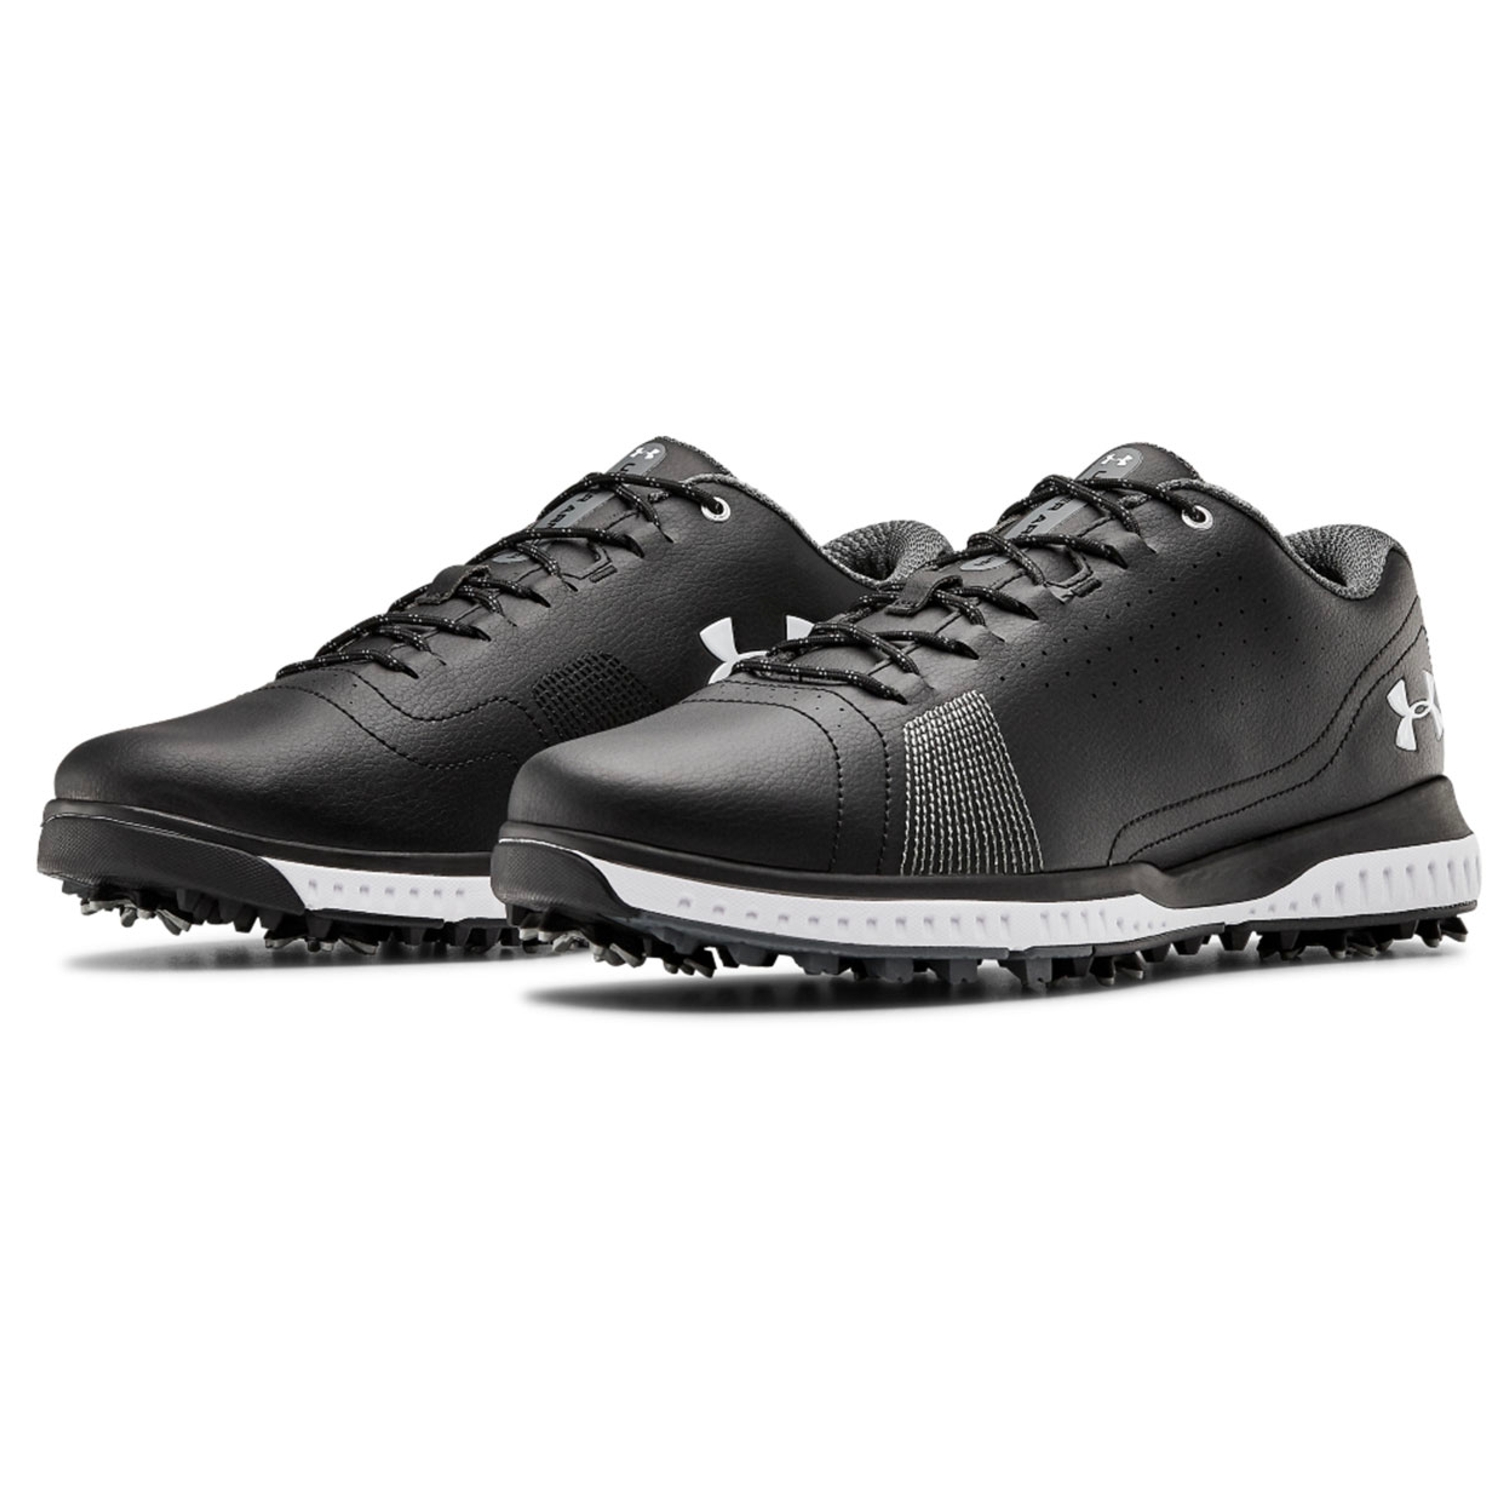 under armour golf shoes fade rst